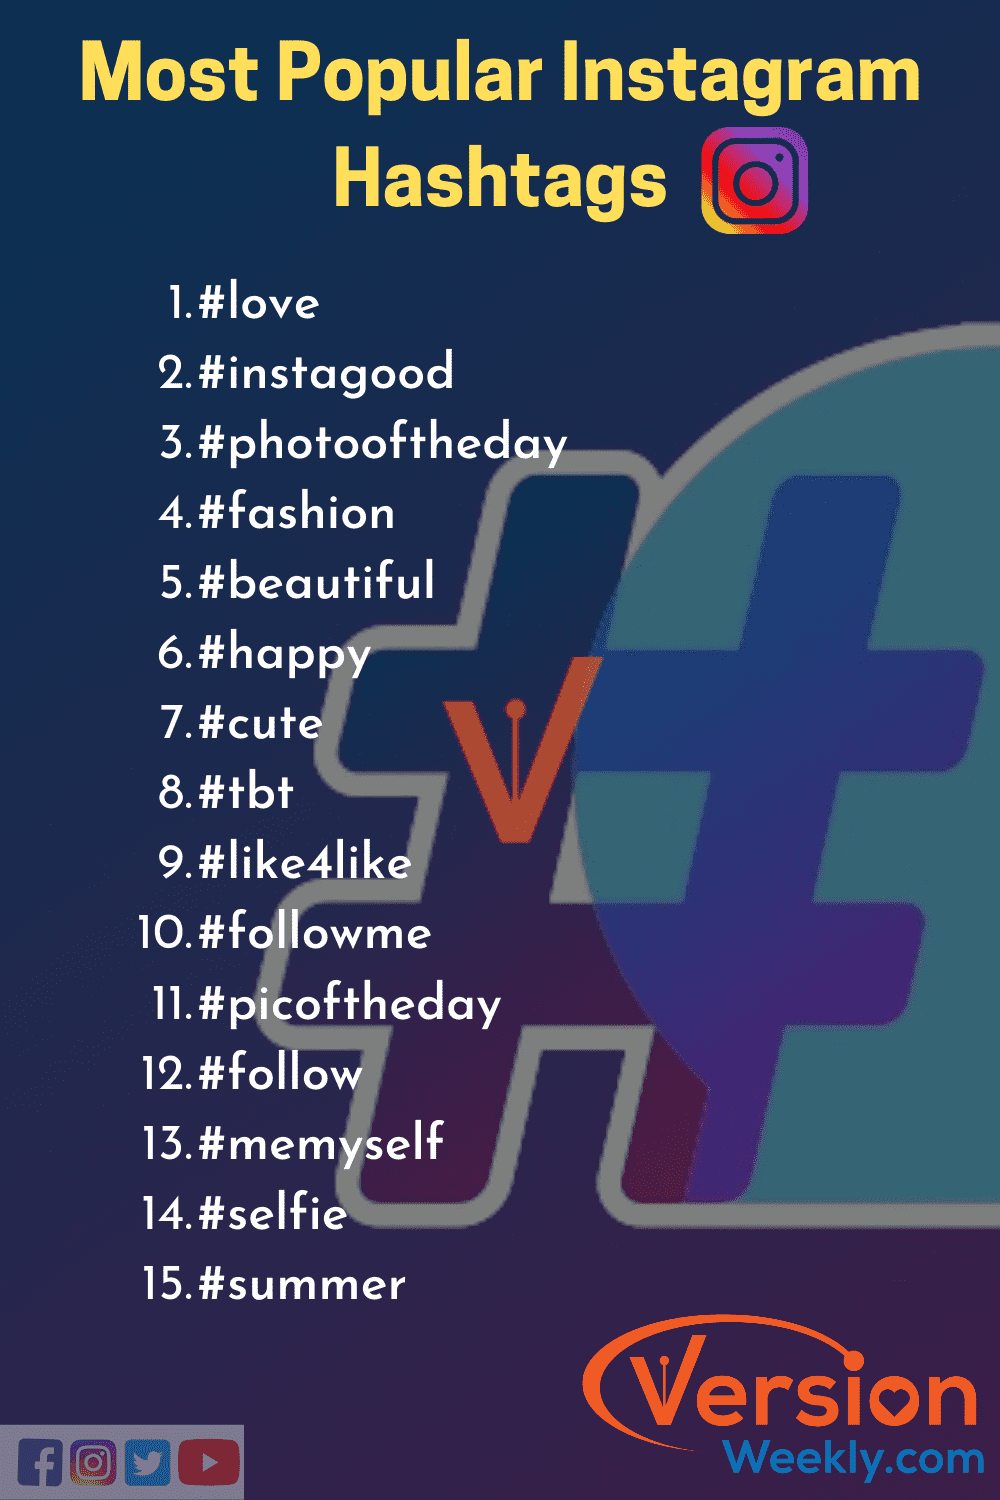 Most popular instagram hashtags in 2020